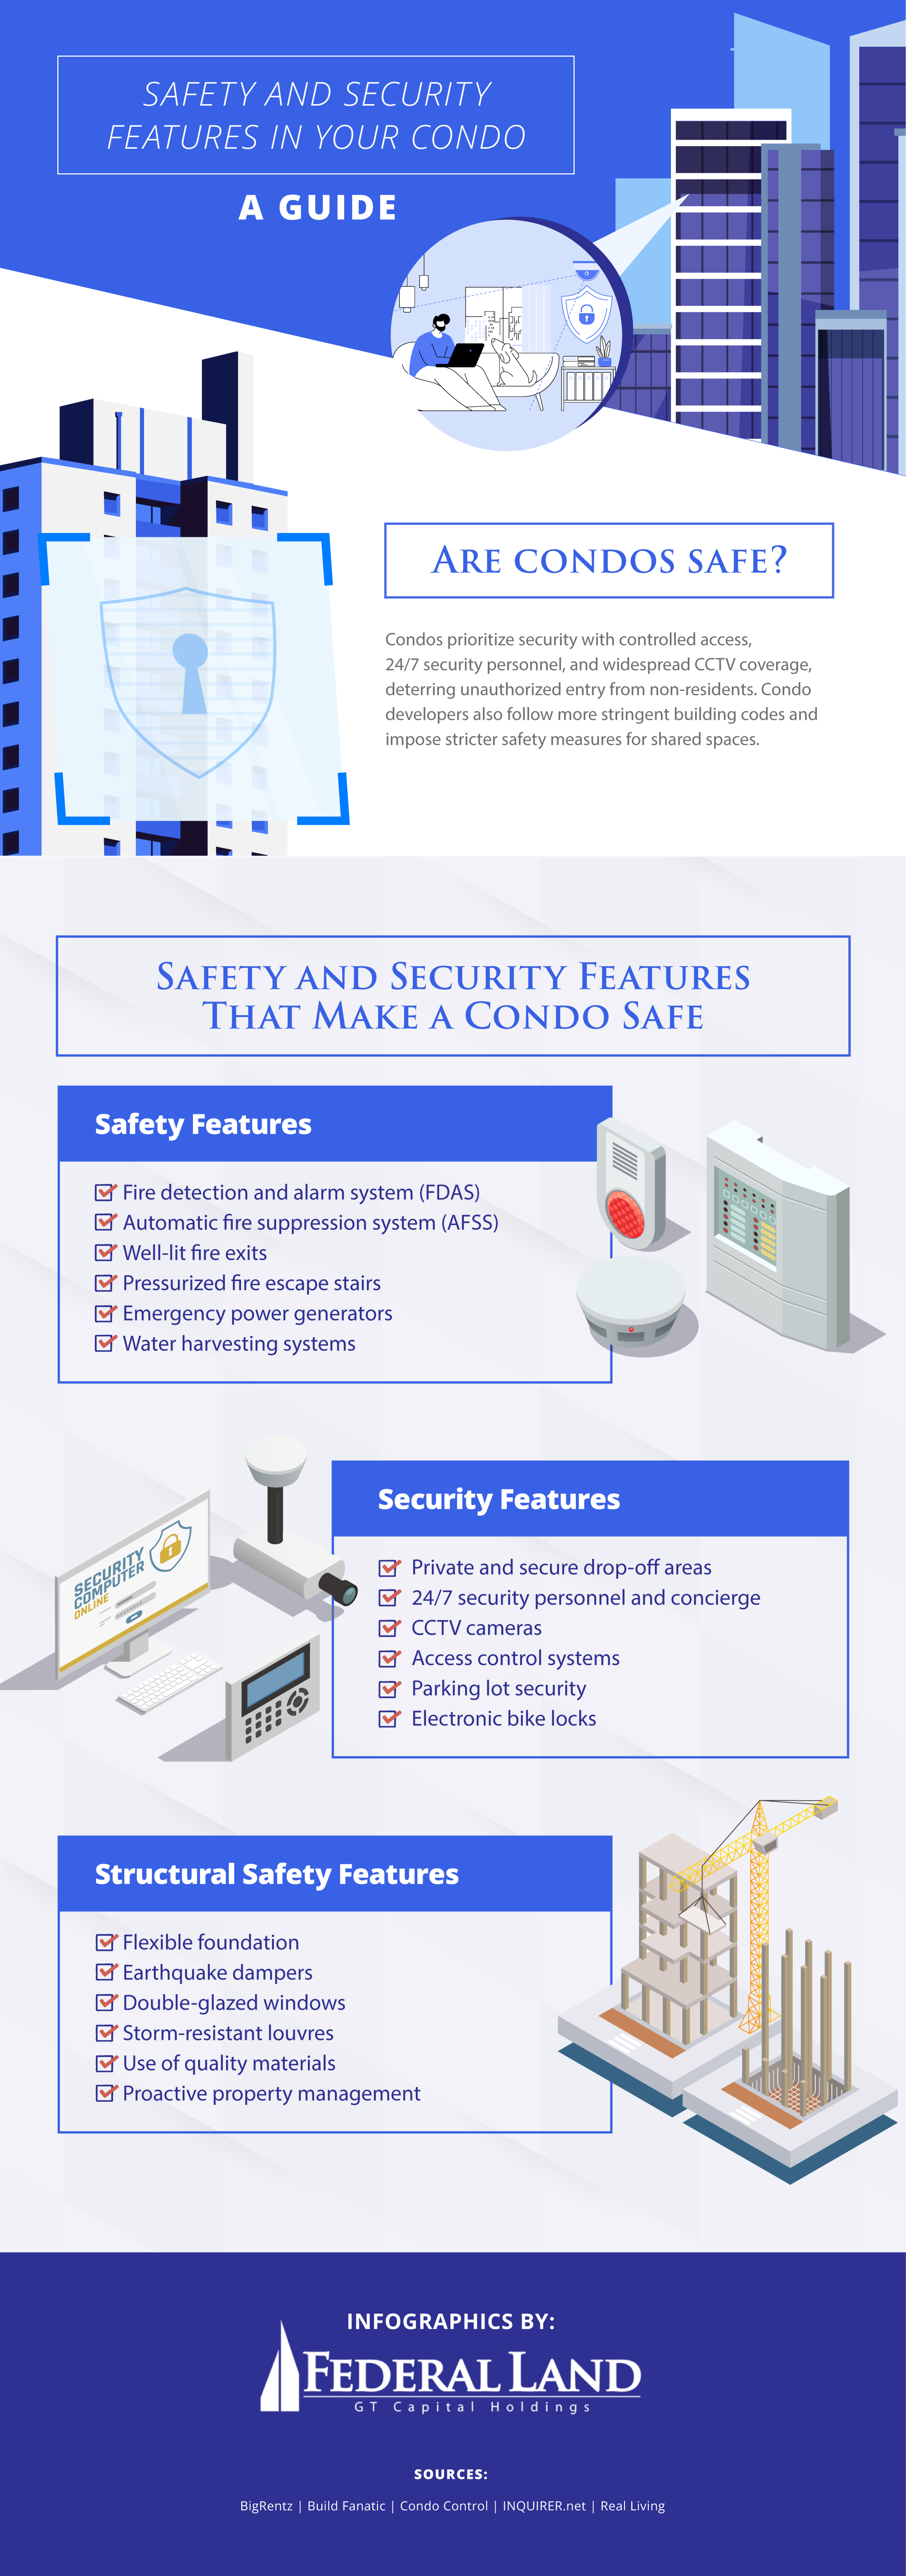 safety and security features in your condo infographic